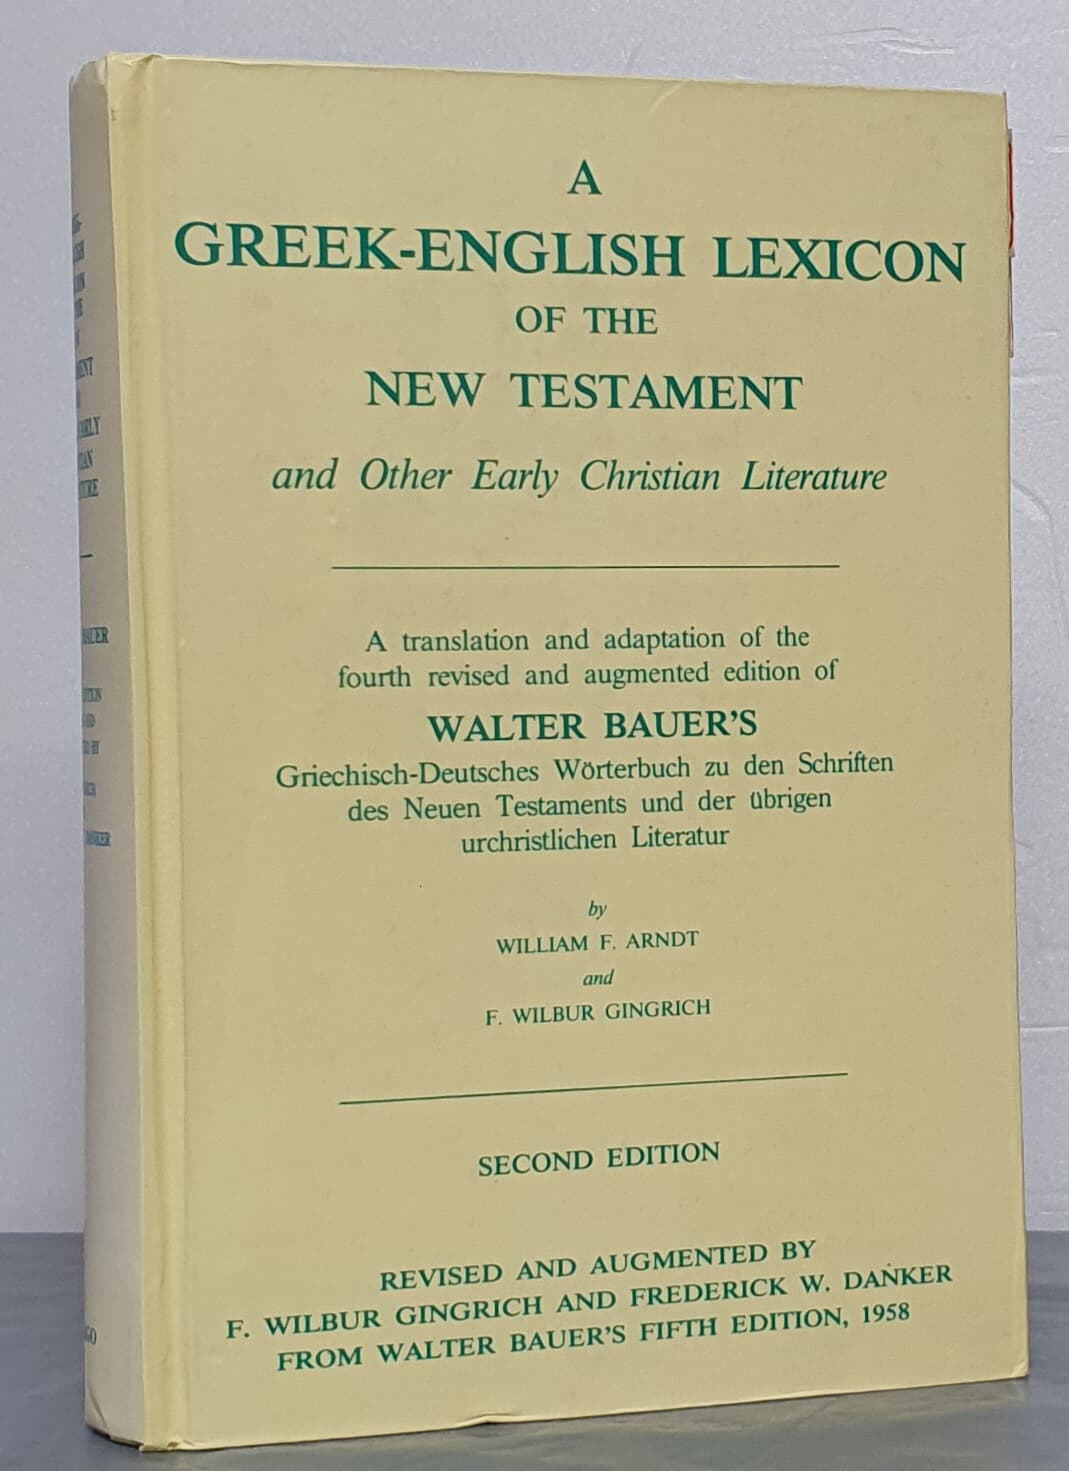 A Greek-English Lexicon of the New Testament and Other Early Christian Literature, Second Edition 